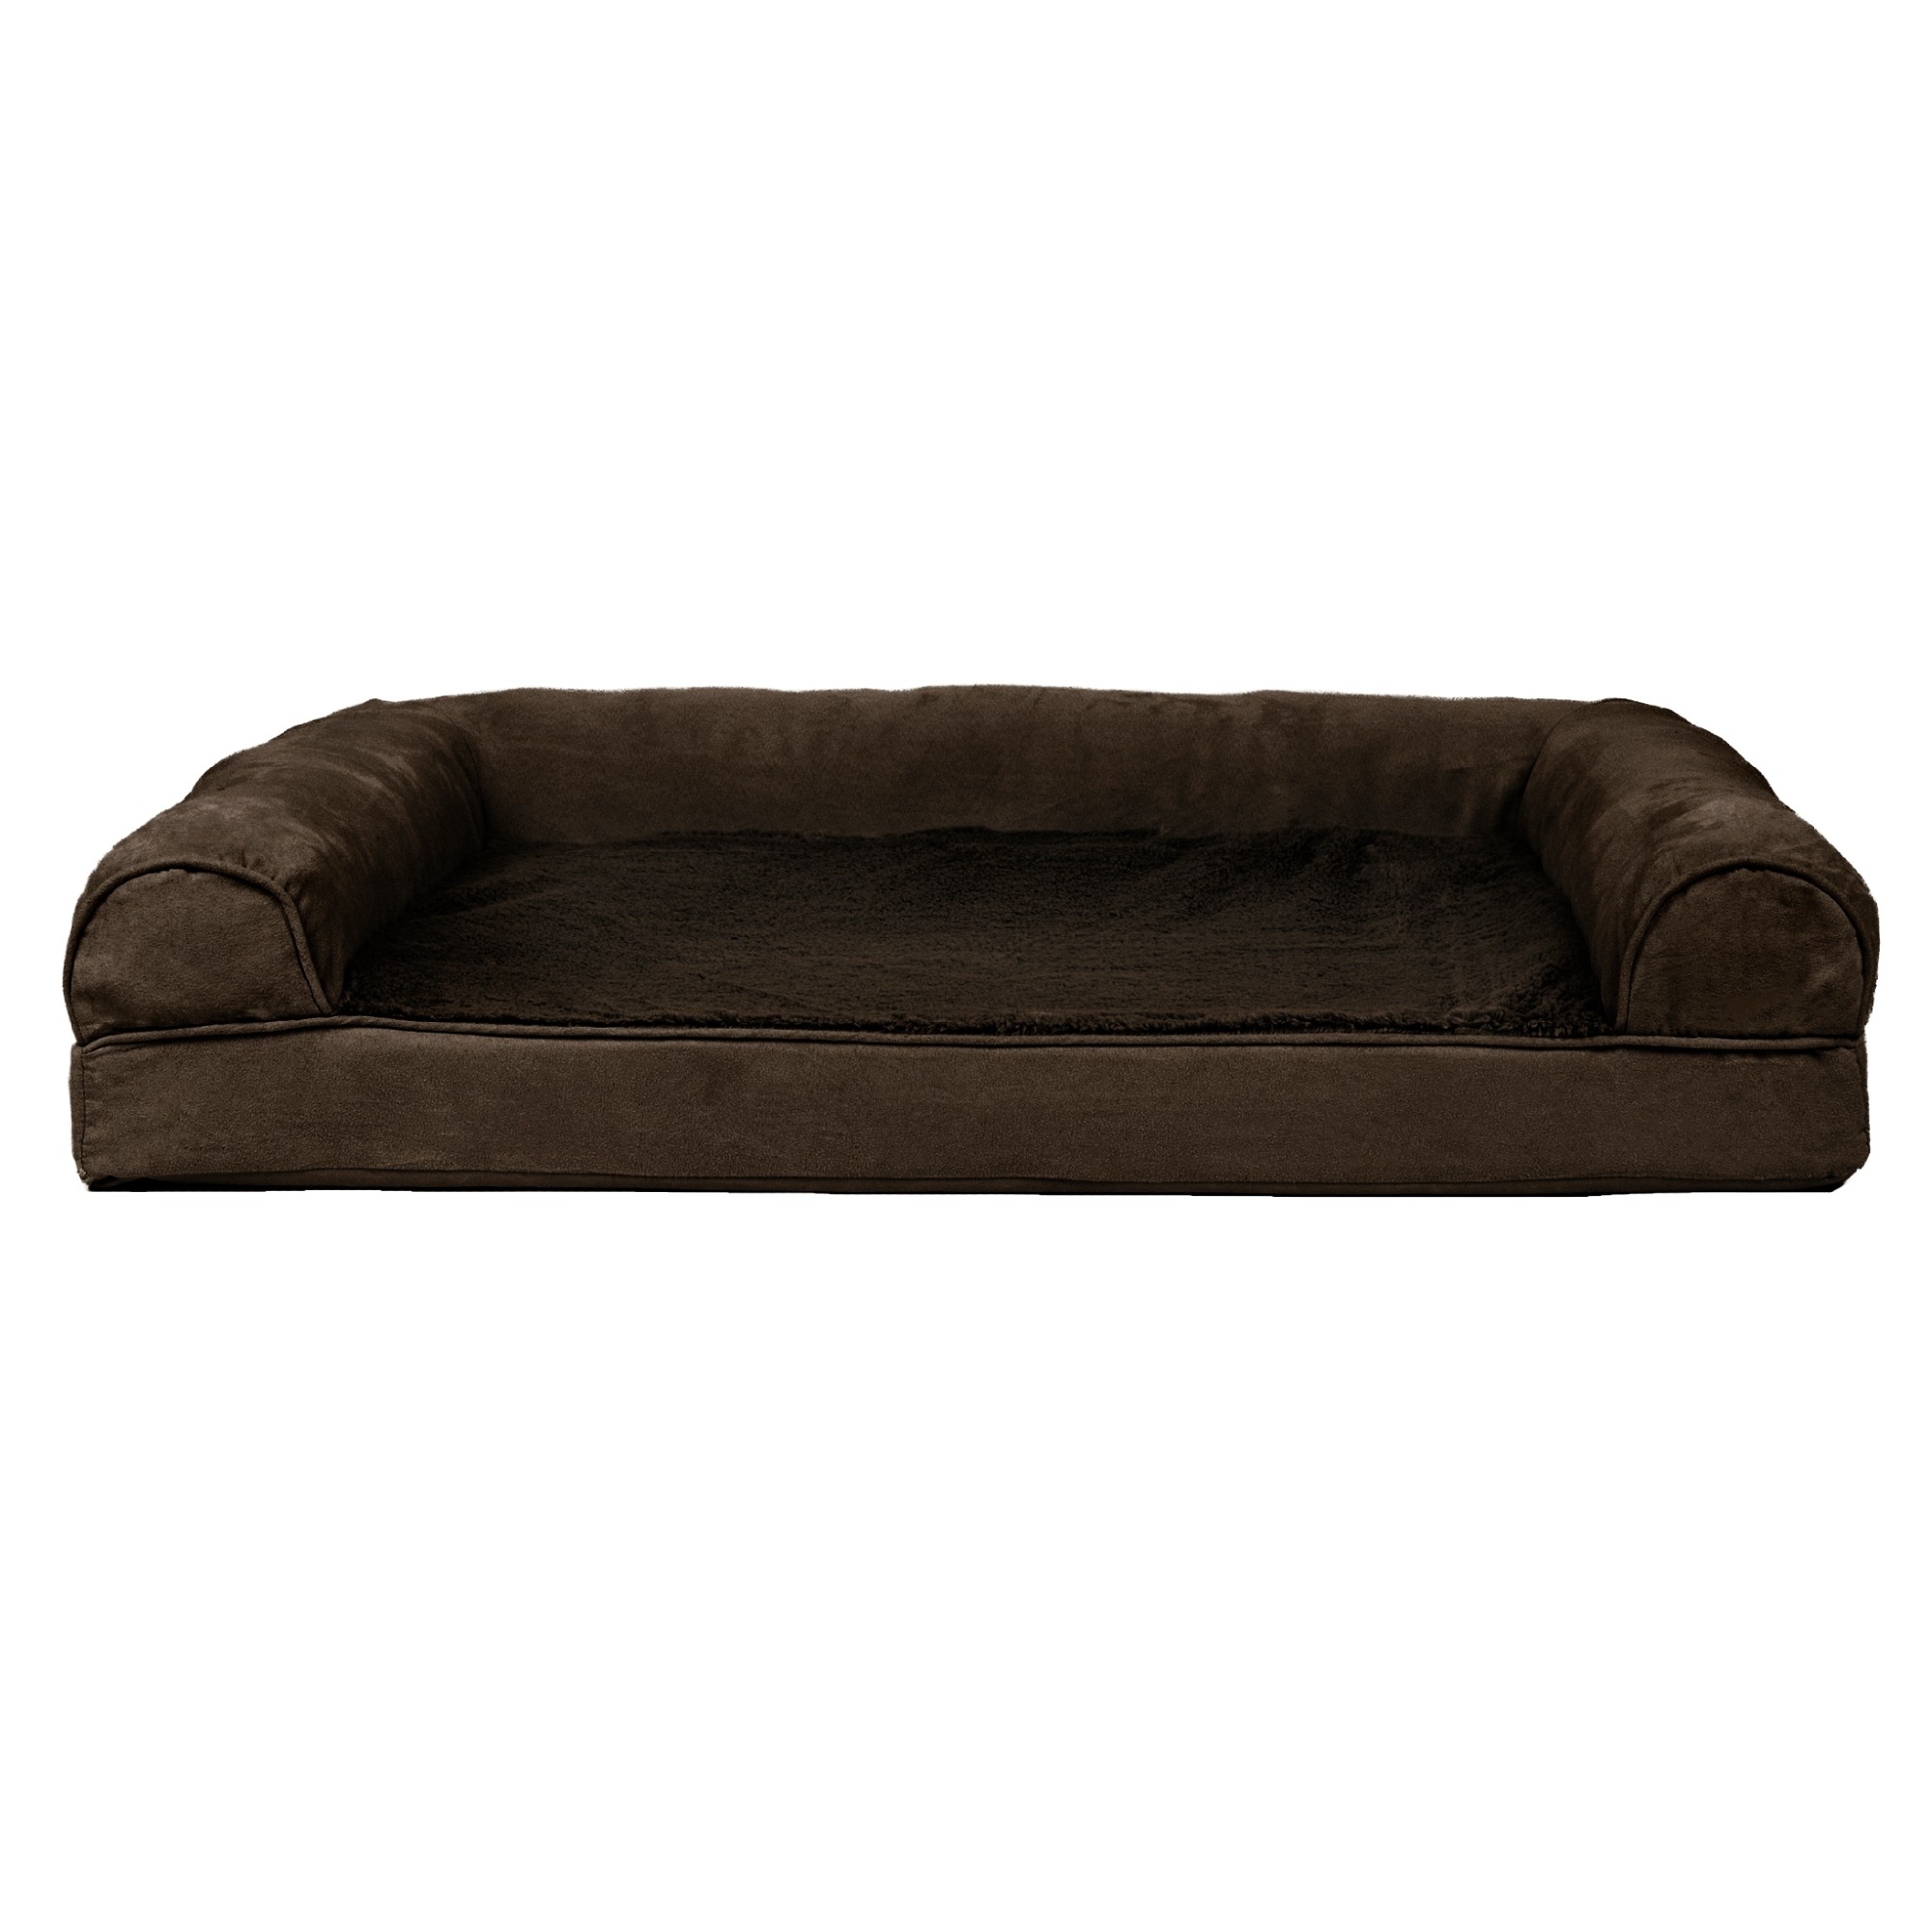 Furhaven Pet Dog Bed Plush & Suede Pillow Sofa-Style Couch Pet Bed for Dogs & Cats Espresso Jumbo